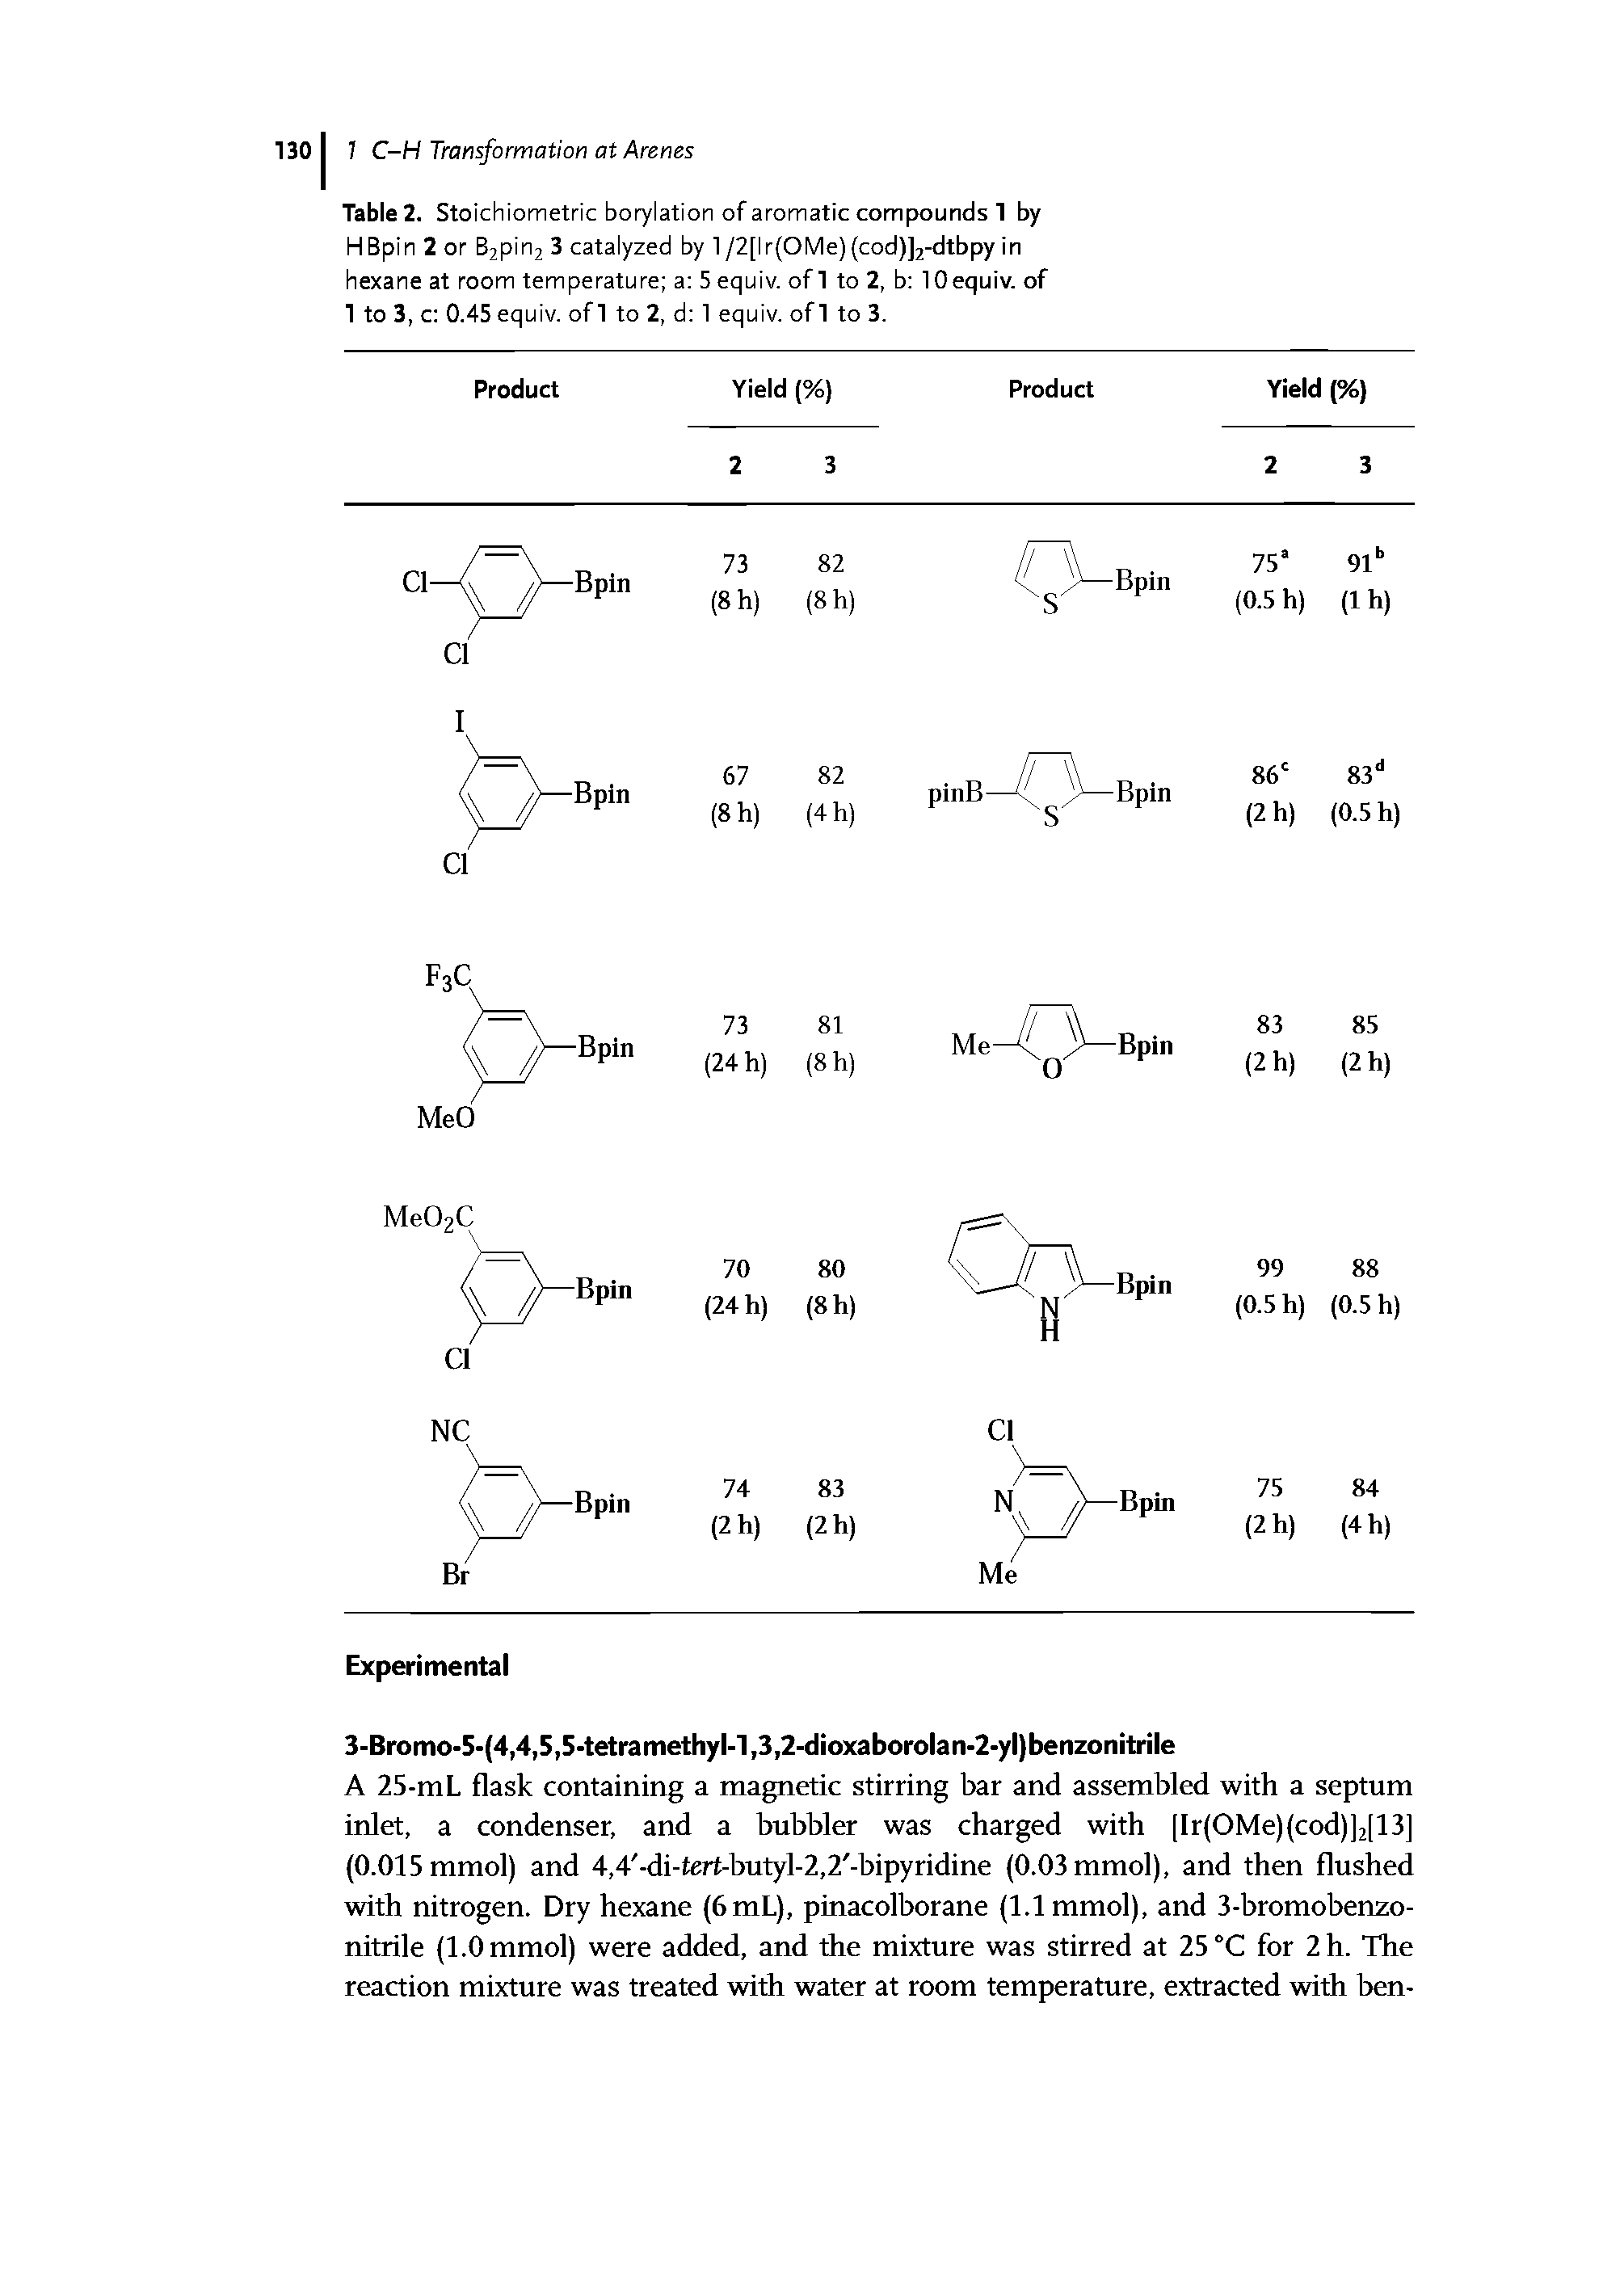 Table 2. Stoichiometric borylation of aromatic compounds 1 by HBpin 2 or B2pin2 3 catalyzed by 1 /2[lr(OMe)(cod)]2-dtbpy in hexane at room temperature a 5equiv. of to 2, b lOequiv. of 1 to 3, c 0.45 equiv. of to 2, d 1 equiv. of to 3.